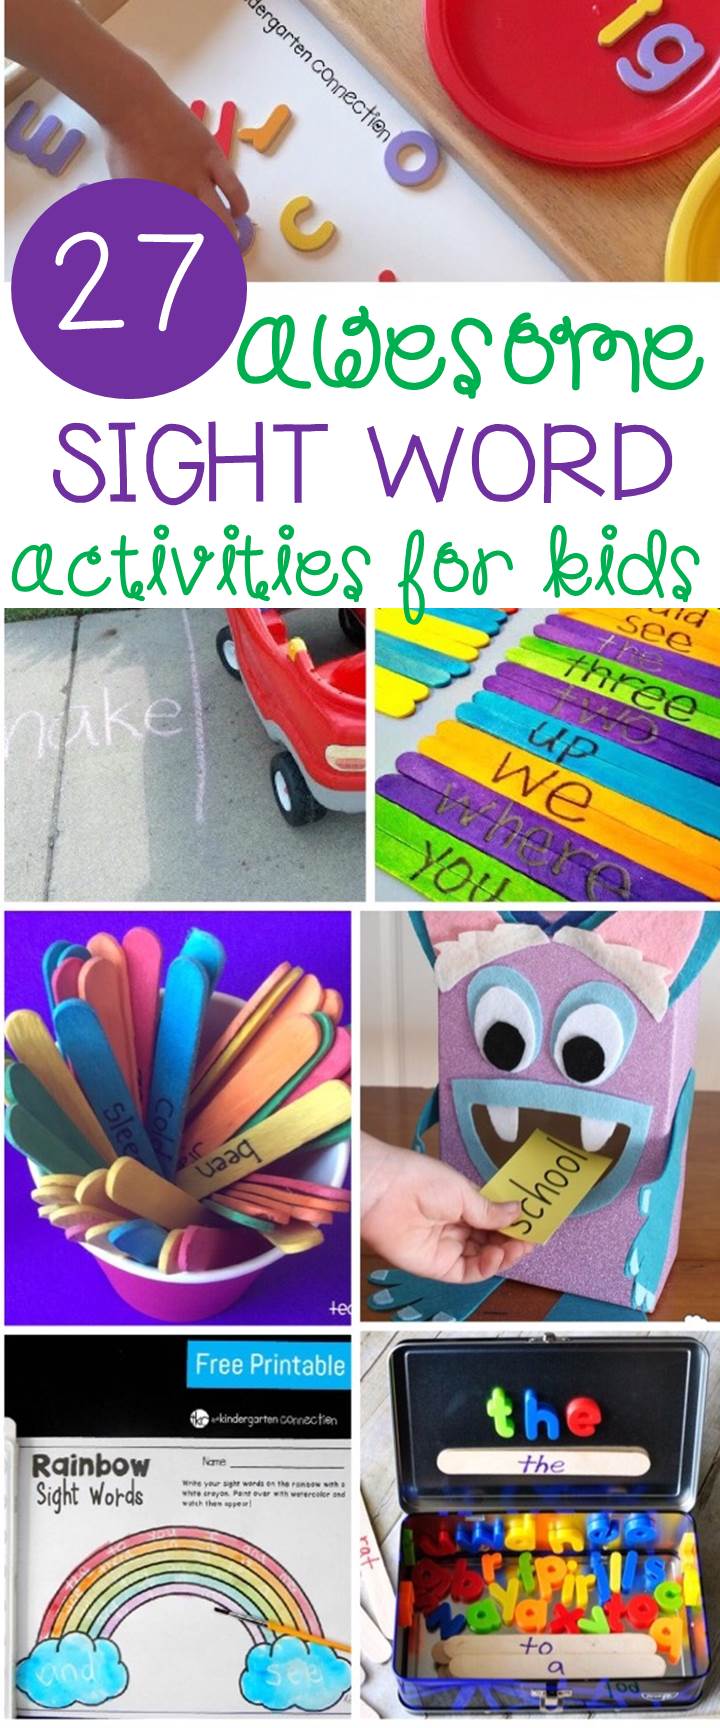 27 Awesome Sight Word Activities - The Kindergarten Connection